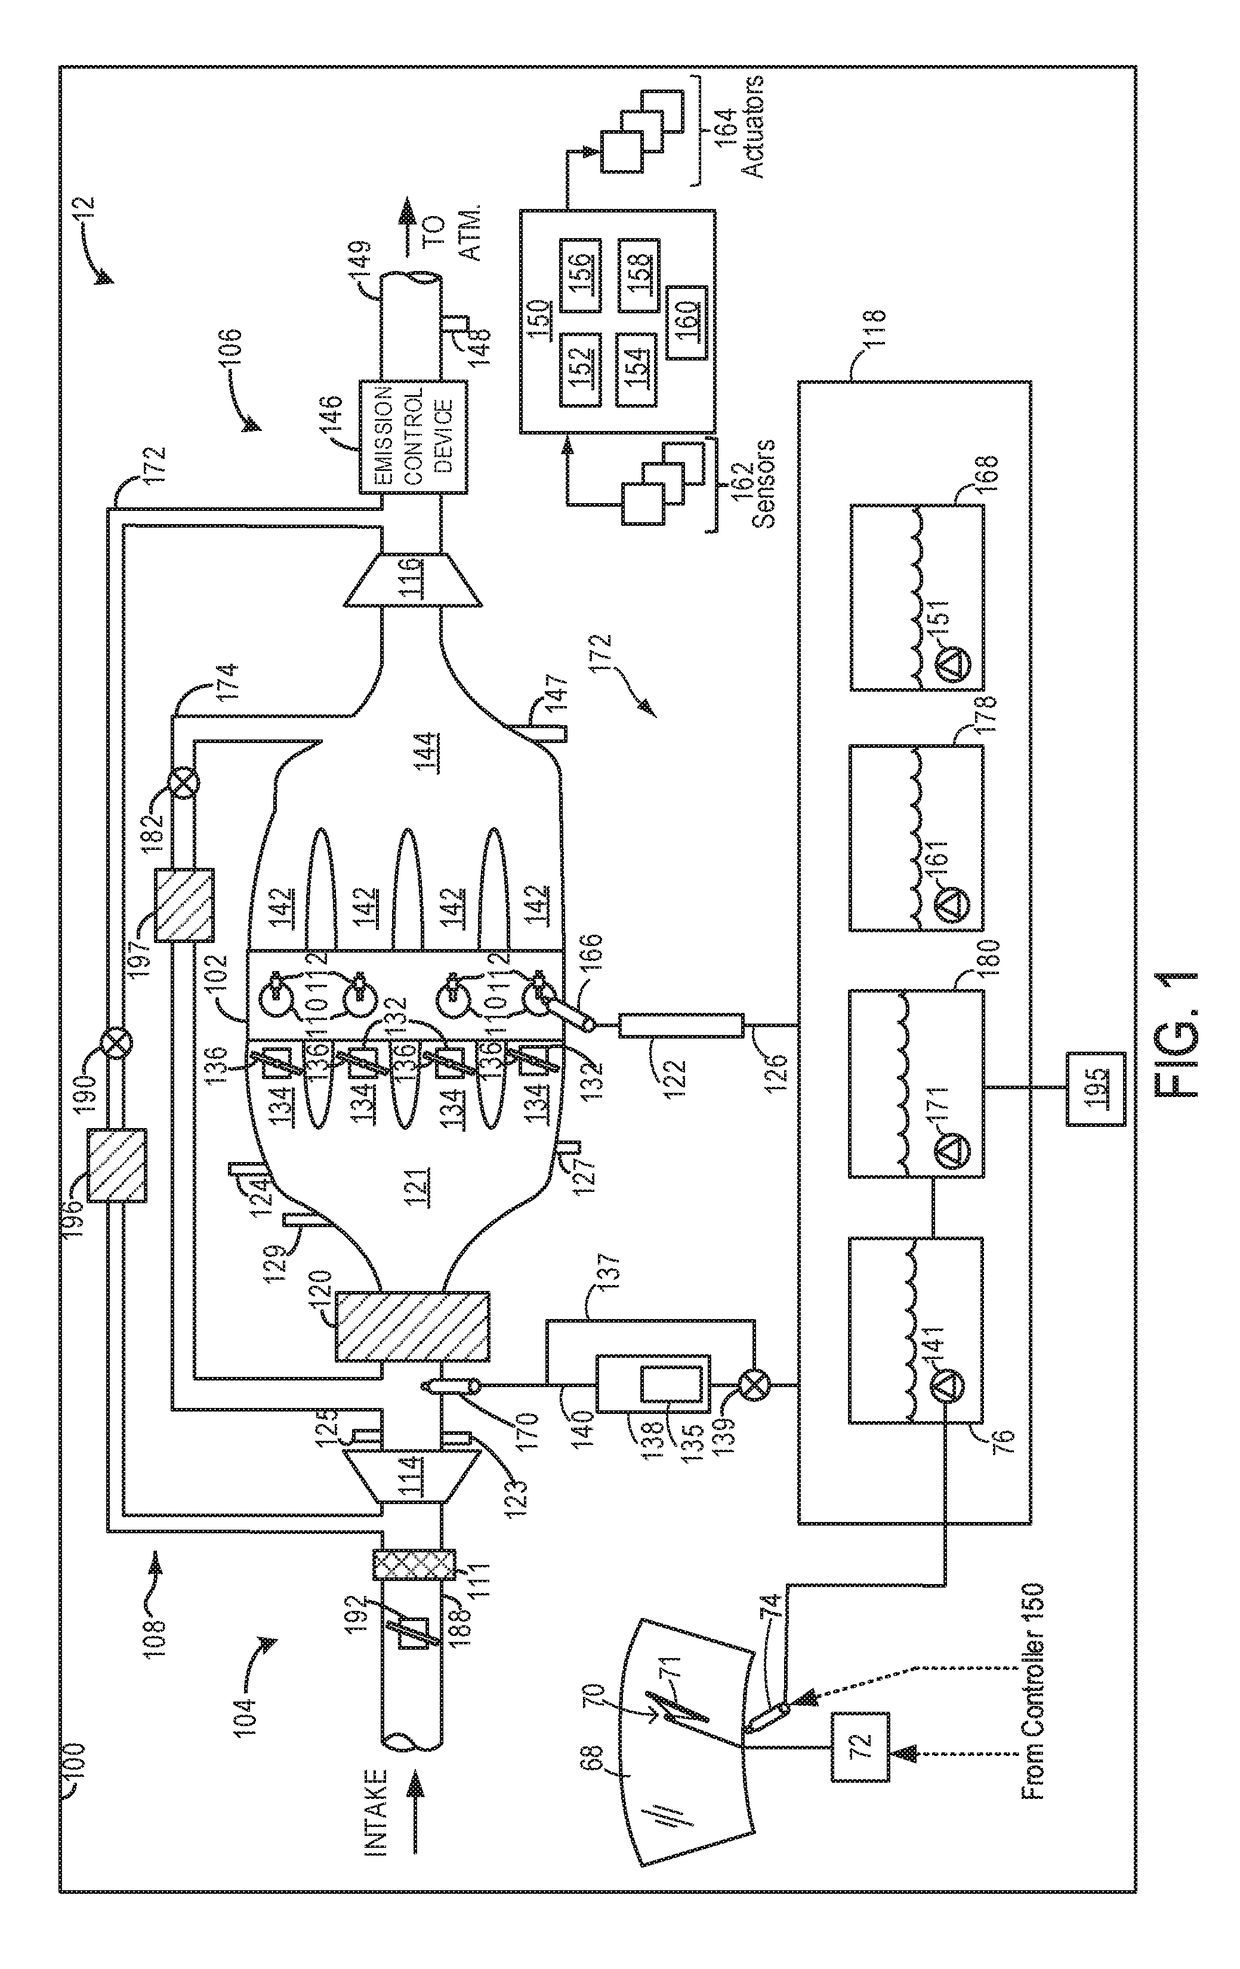 Systems and methods for removing coking deposits in a fuel injection system